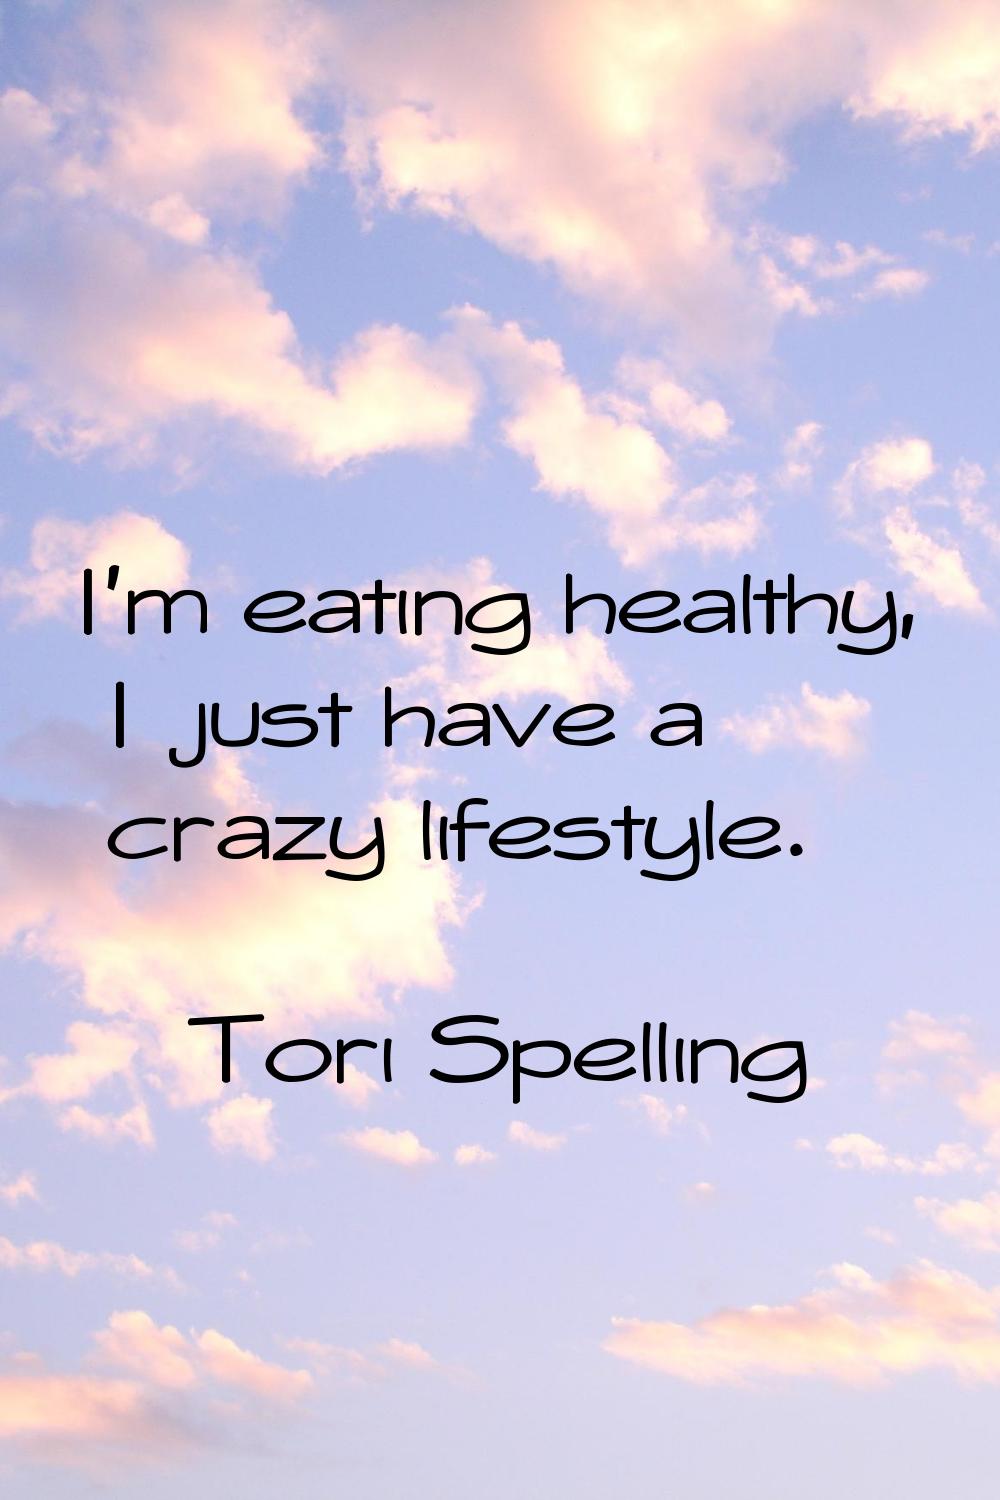 I'm eating healthy, I just have a crazy lifestyle.